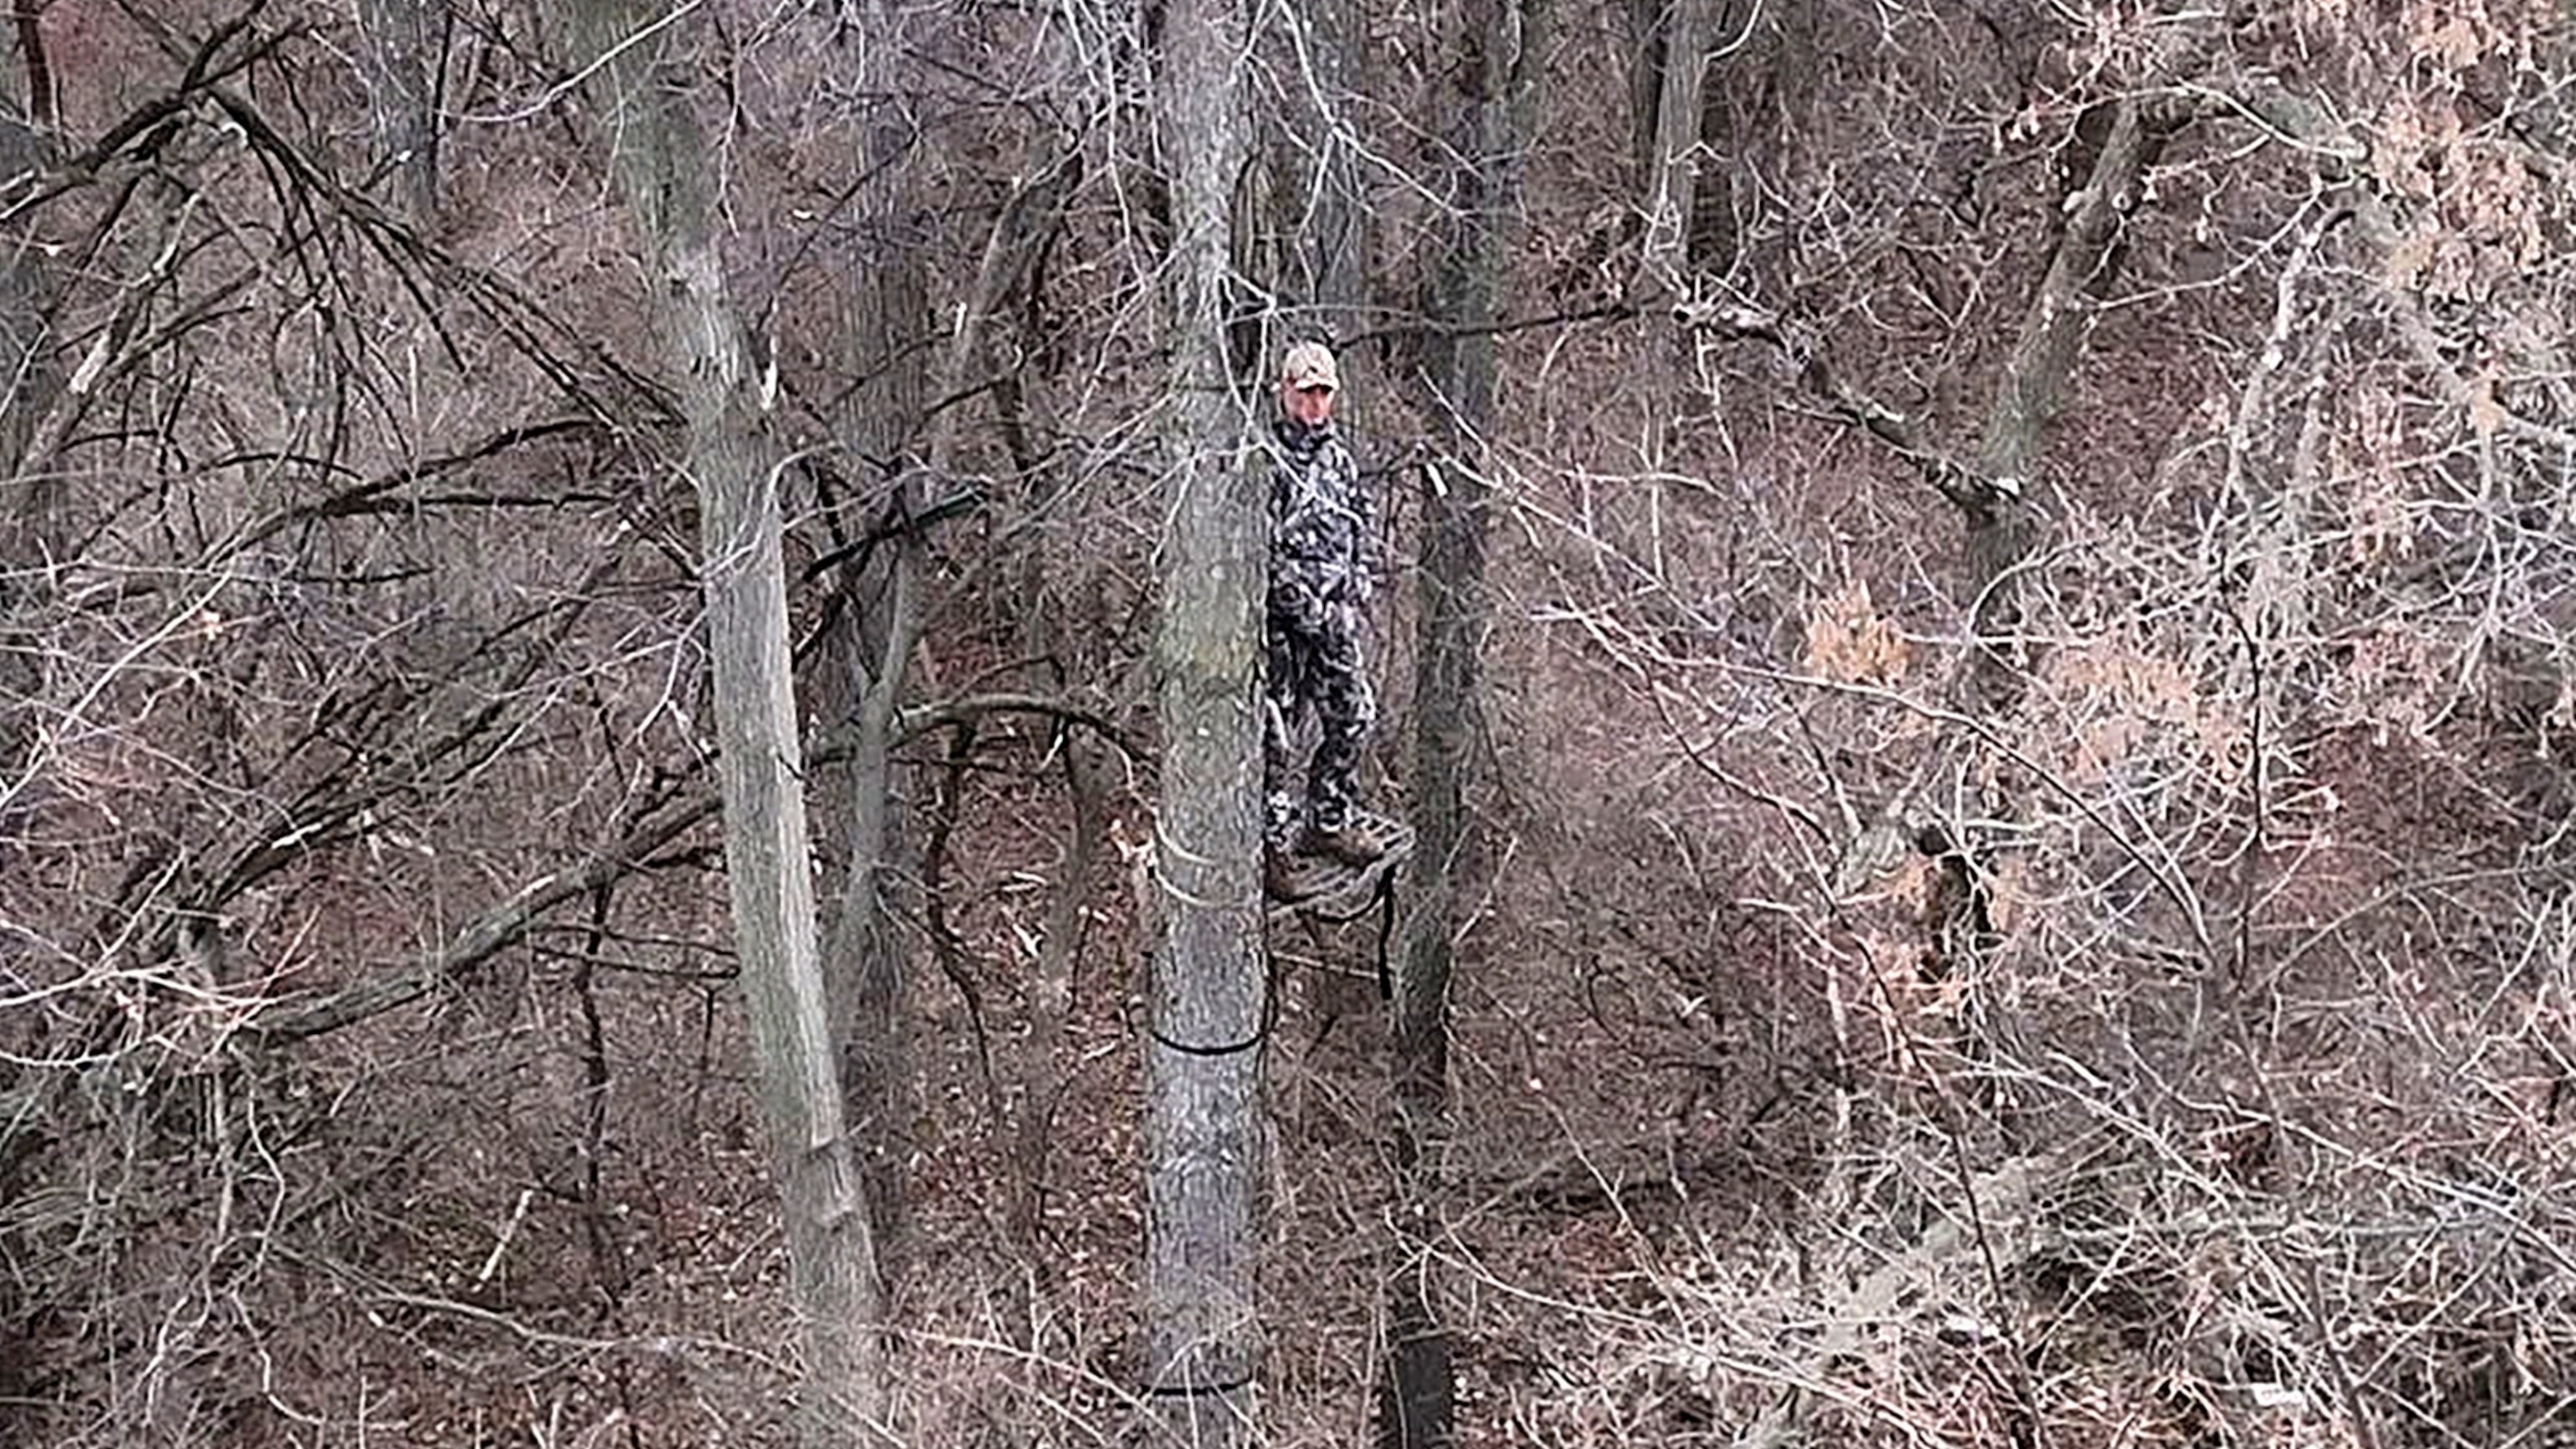 PHOTO: Rob Sand camouflaged in a tree stand while hunting in Iowa, Des Moines, IA.